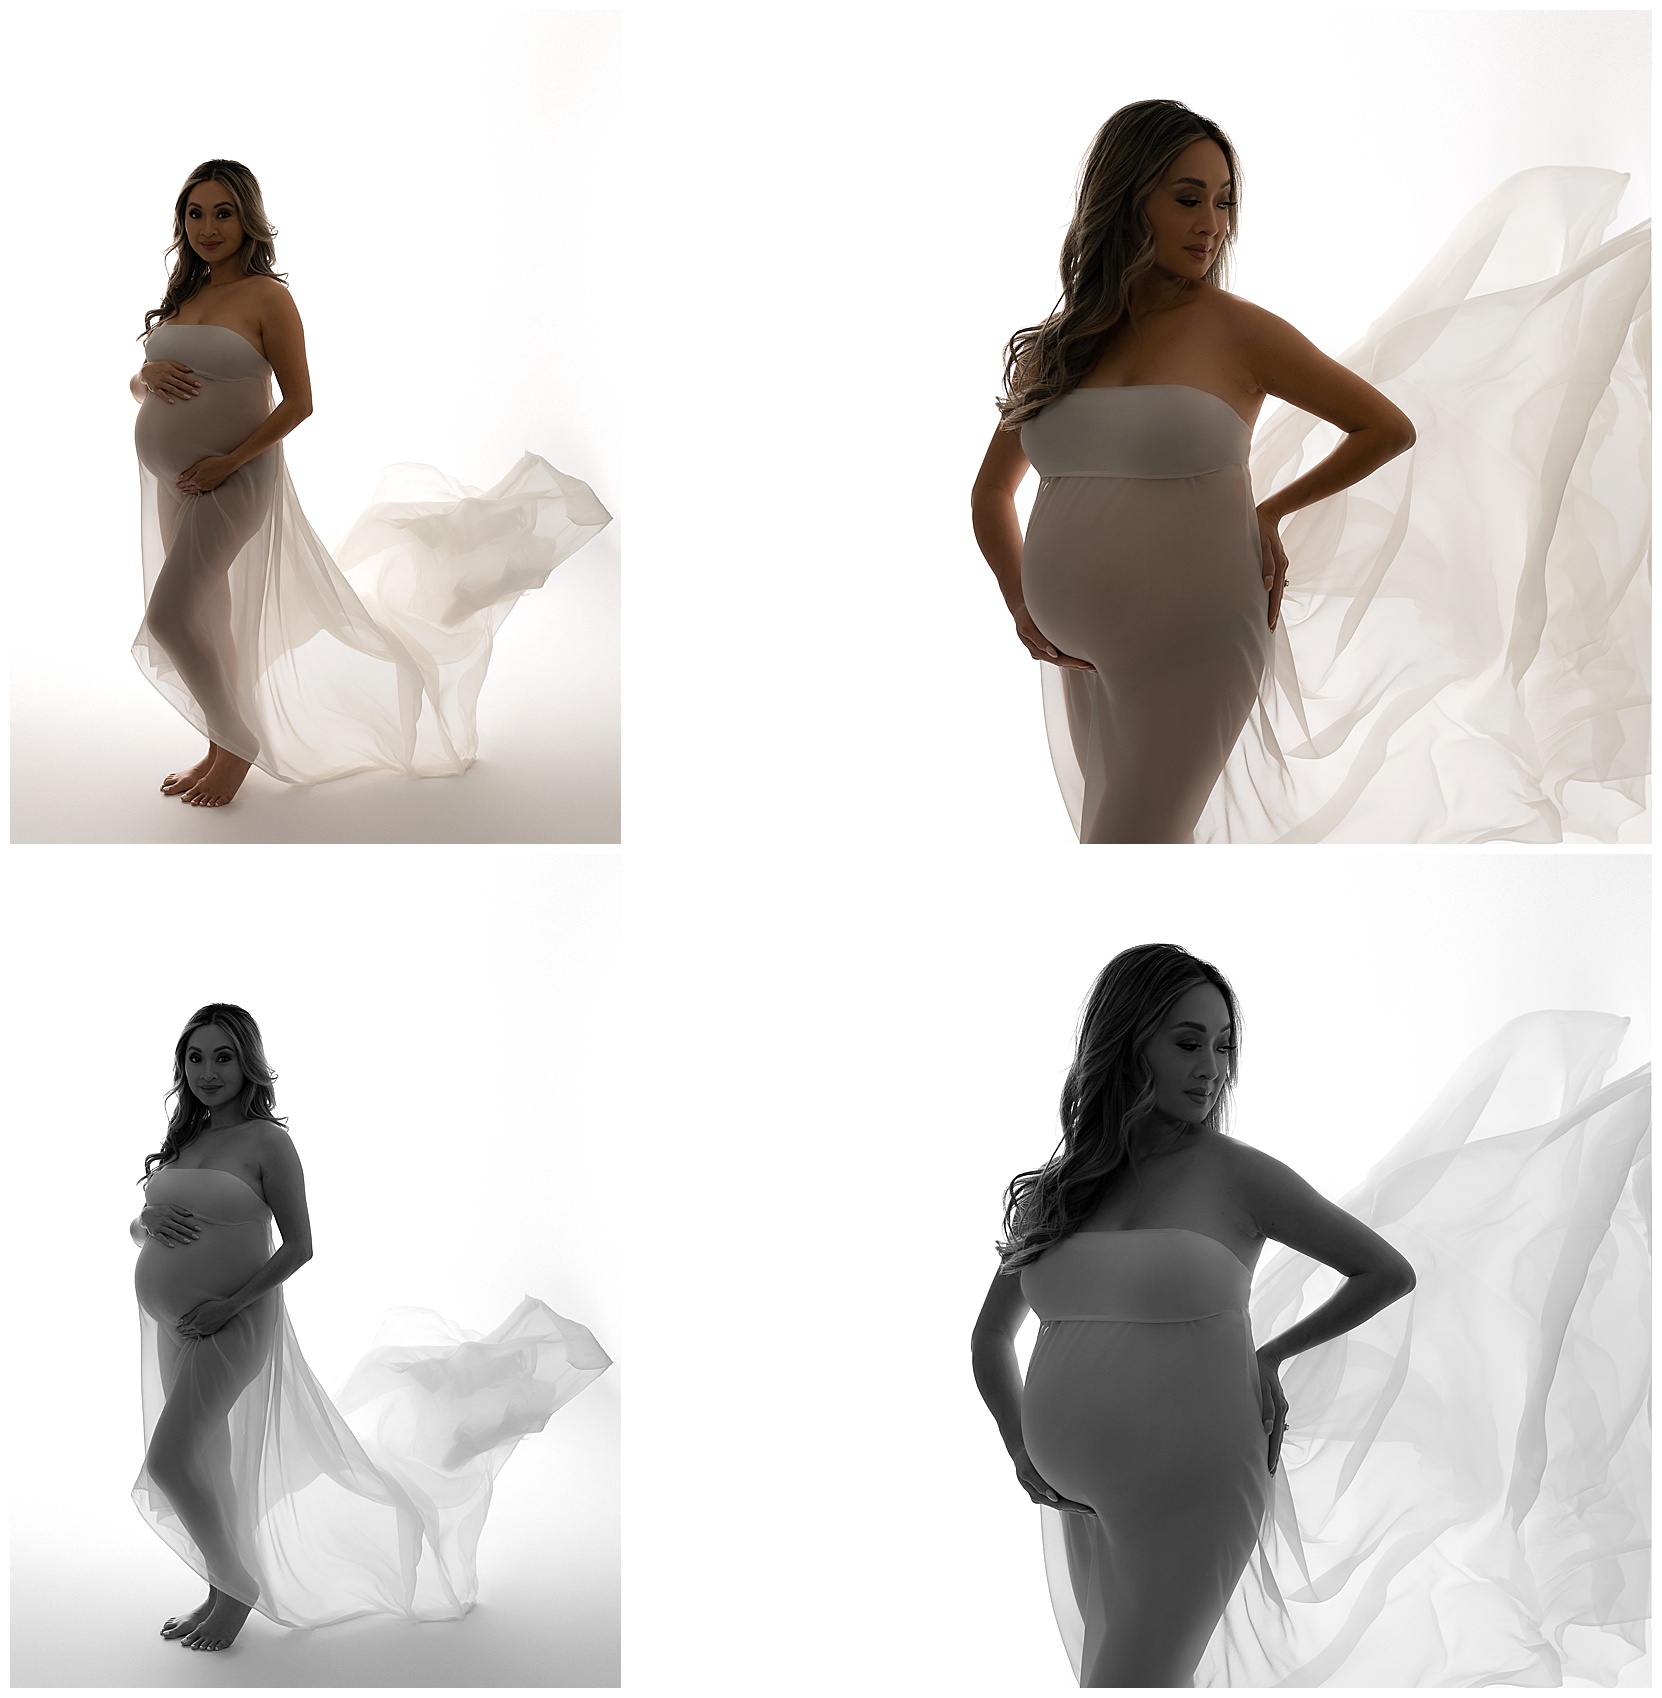 Four starkly-lit austin pregnancy photos featuring a bright white background and pregnant woman in shadows showing off her stomach.